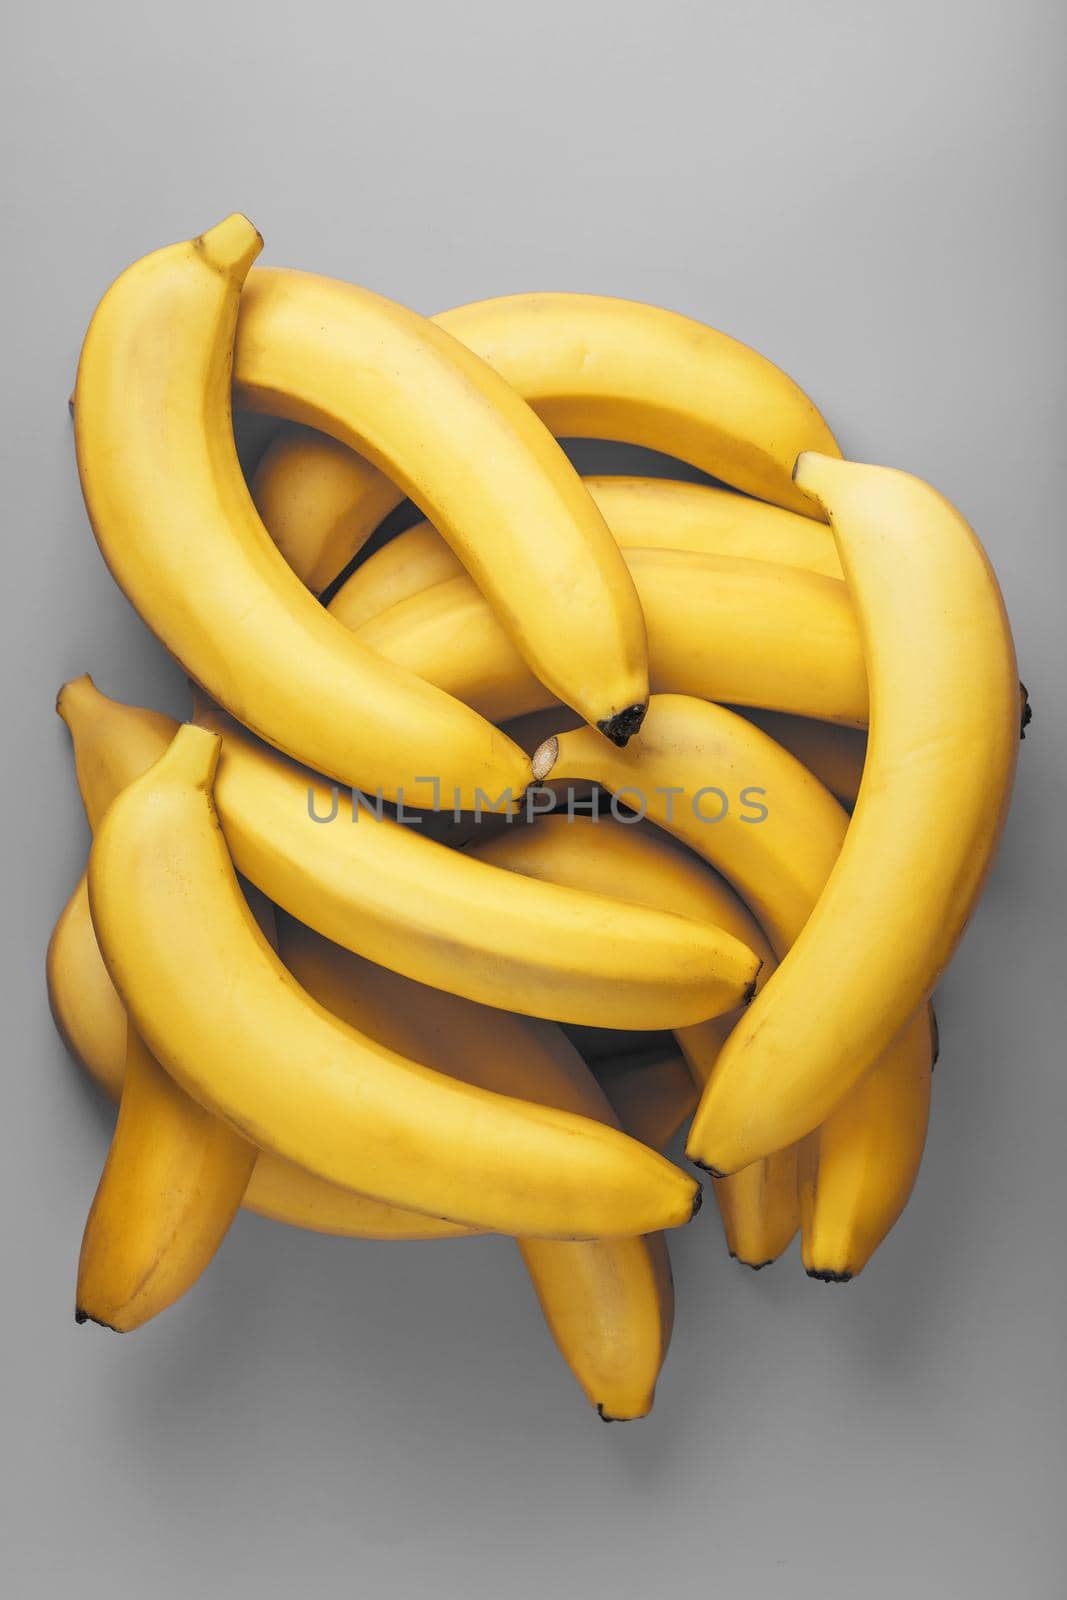 A bunch of fresh yellow bananas on a gray background in the fashionable colors of 2021 by AlexGrec